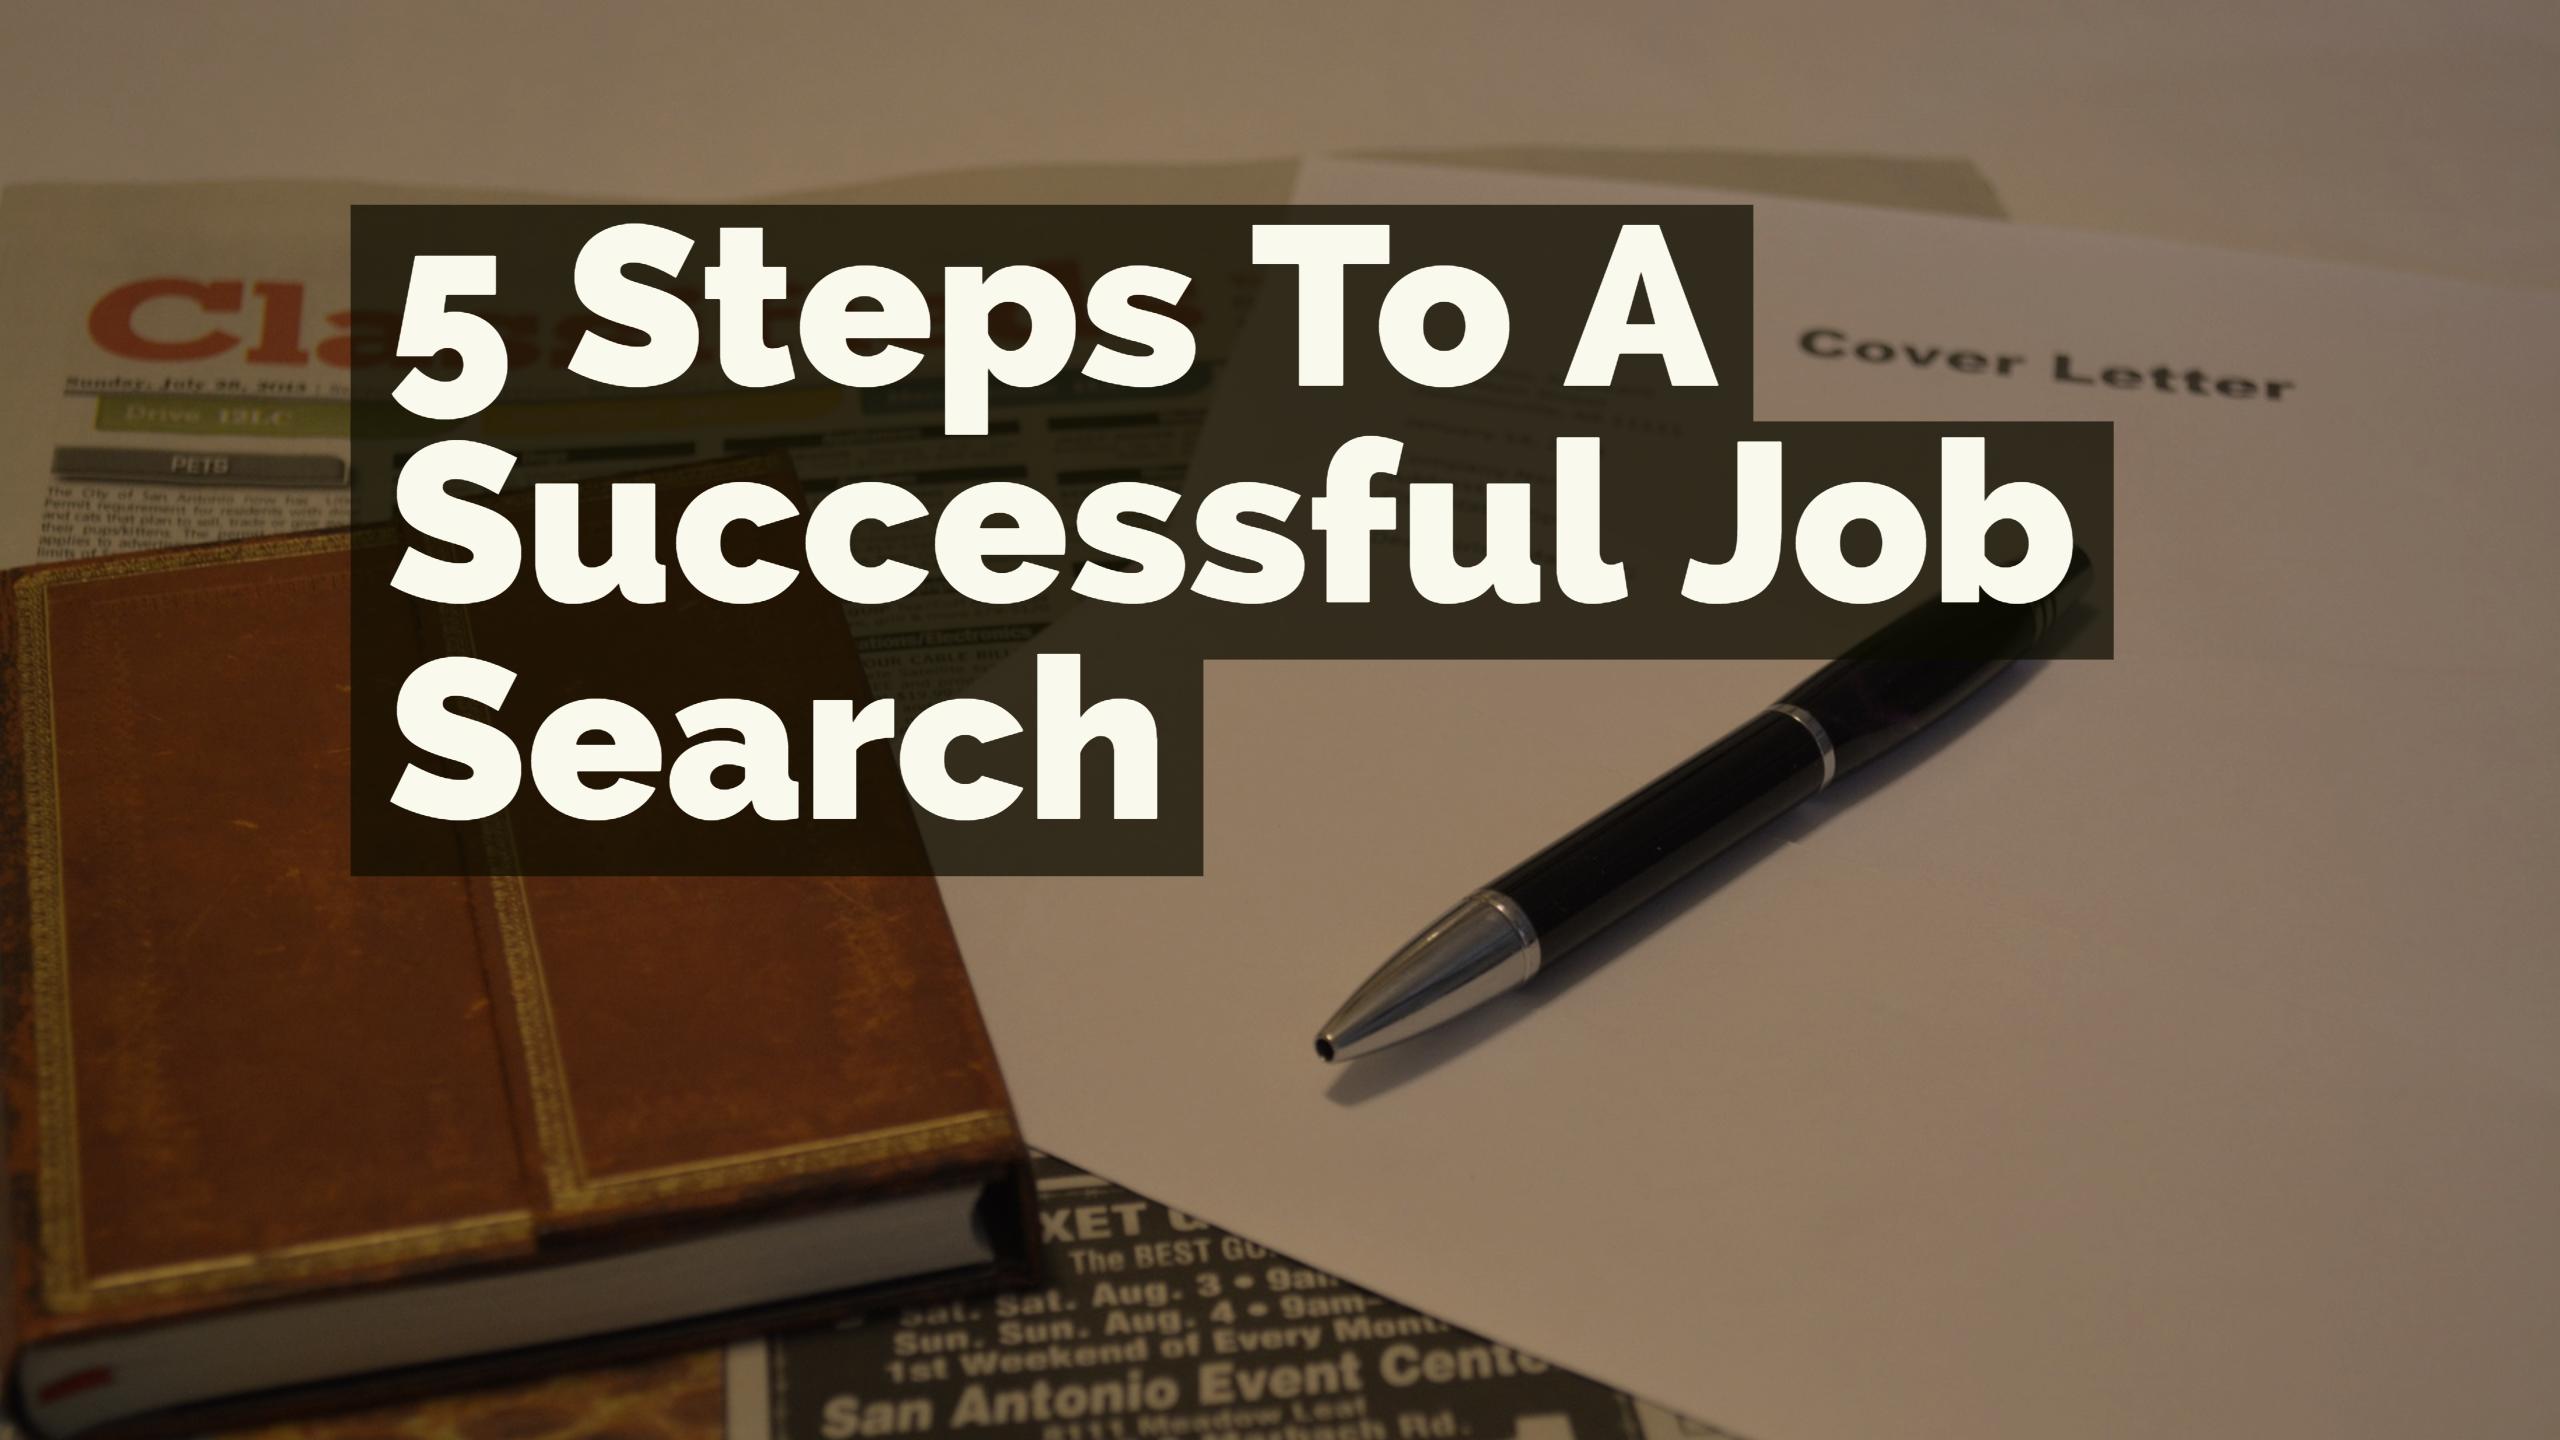 5 Steps To A Successful Job Search